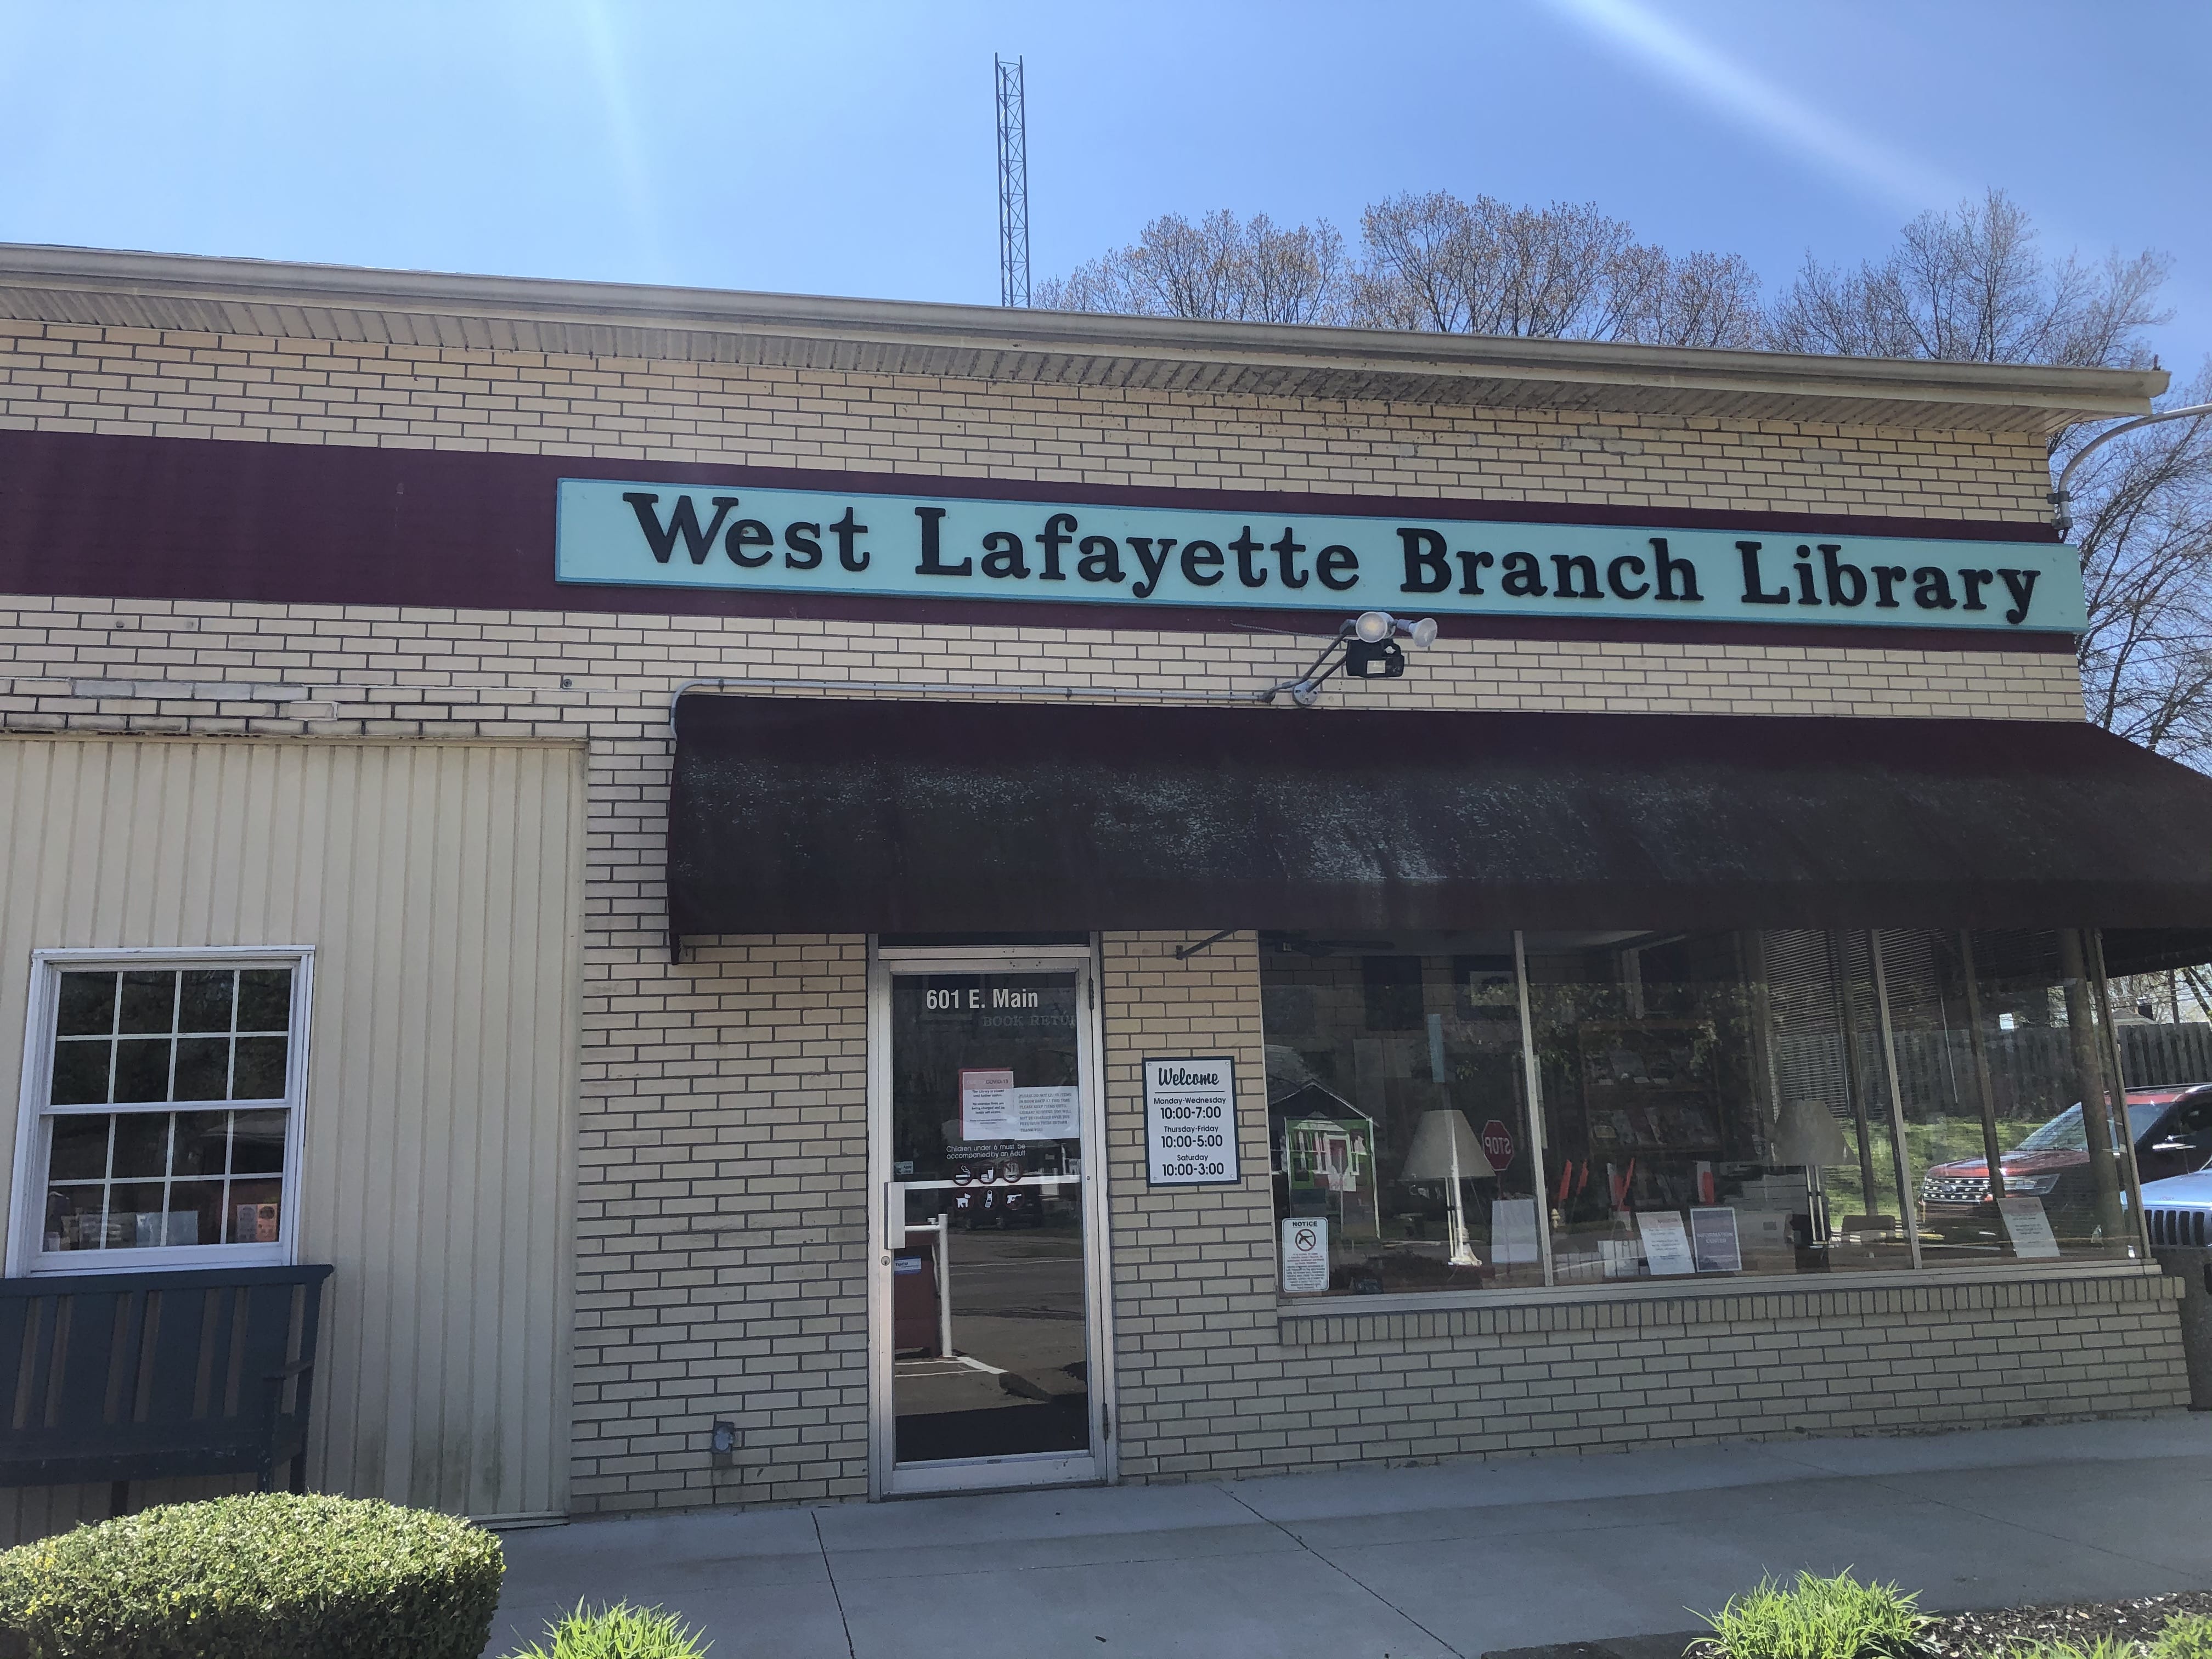 West Lafayette Branch Library